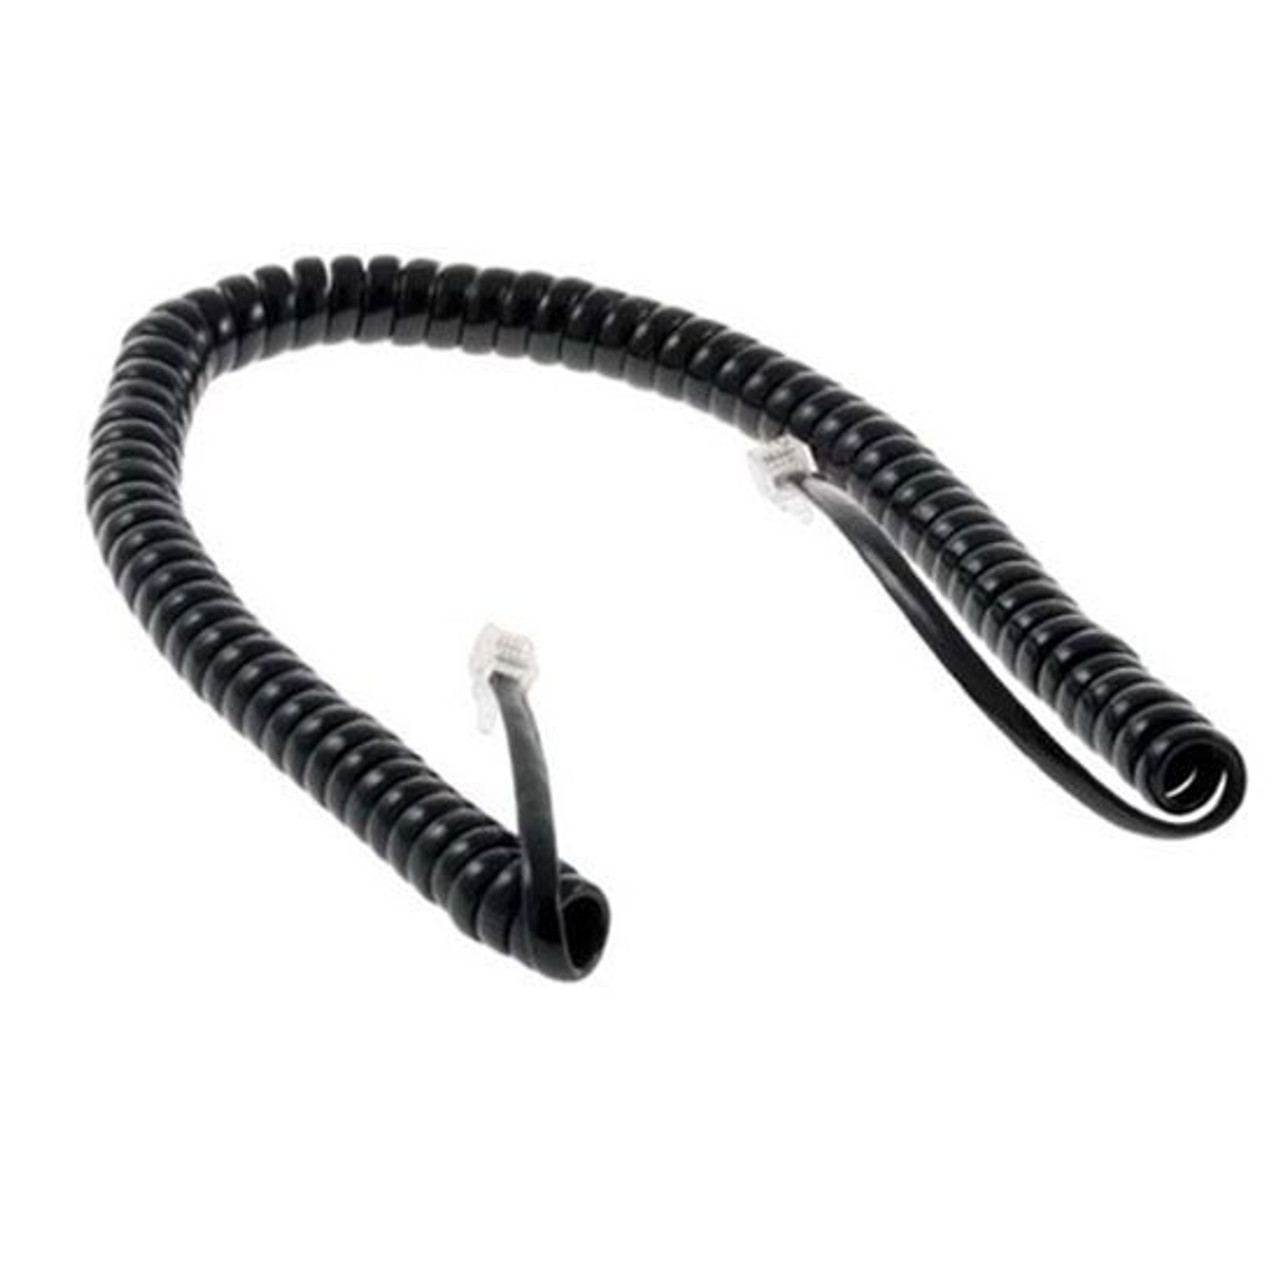 Steren 302-007BK 7' FT Black Handset Cord Telephone Coiled Four Position 4-Pin UL Modular Plugs Each End RJ-22 4P4C Phone Line Telephone Hand-Set RJ22 Snap-In Replacement